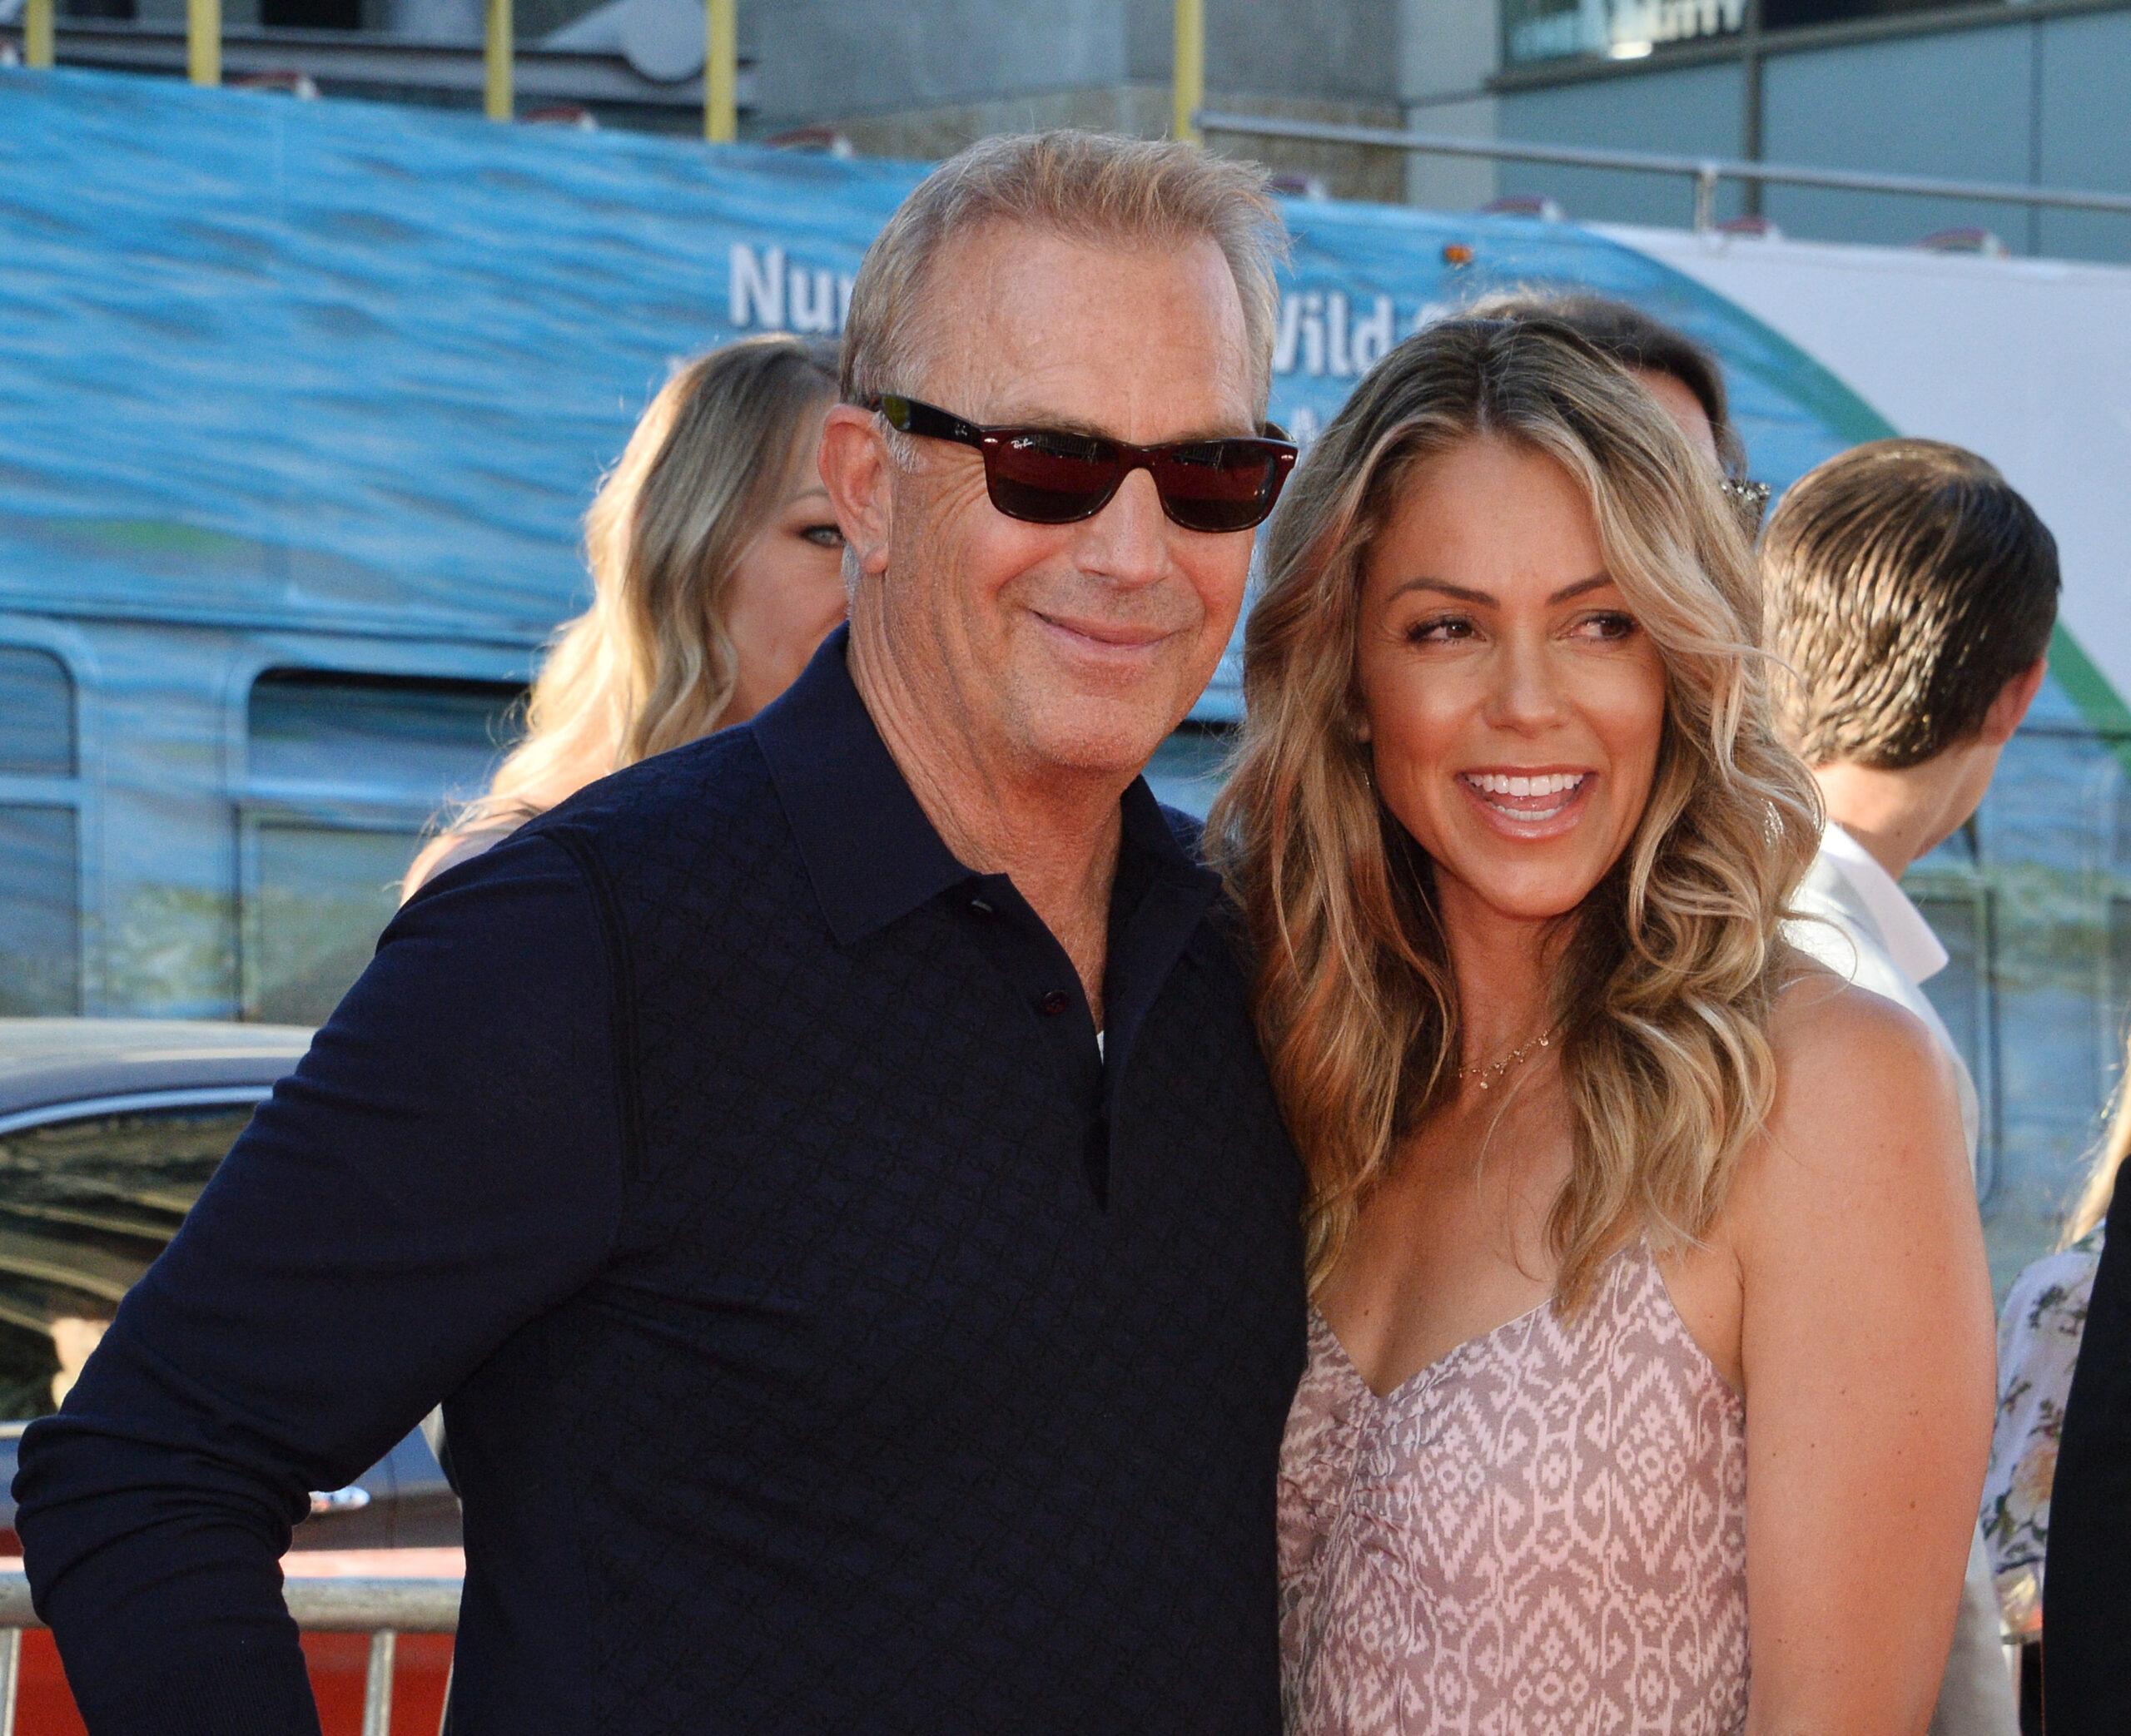 Kevin Costner's ExWife Allegedly Planning To Marry His Former Friend